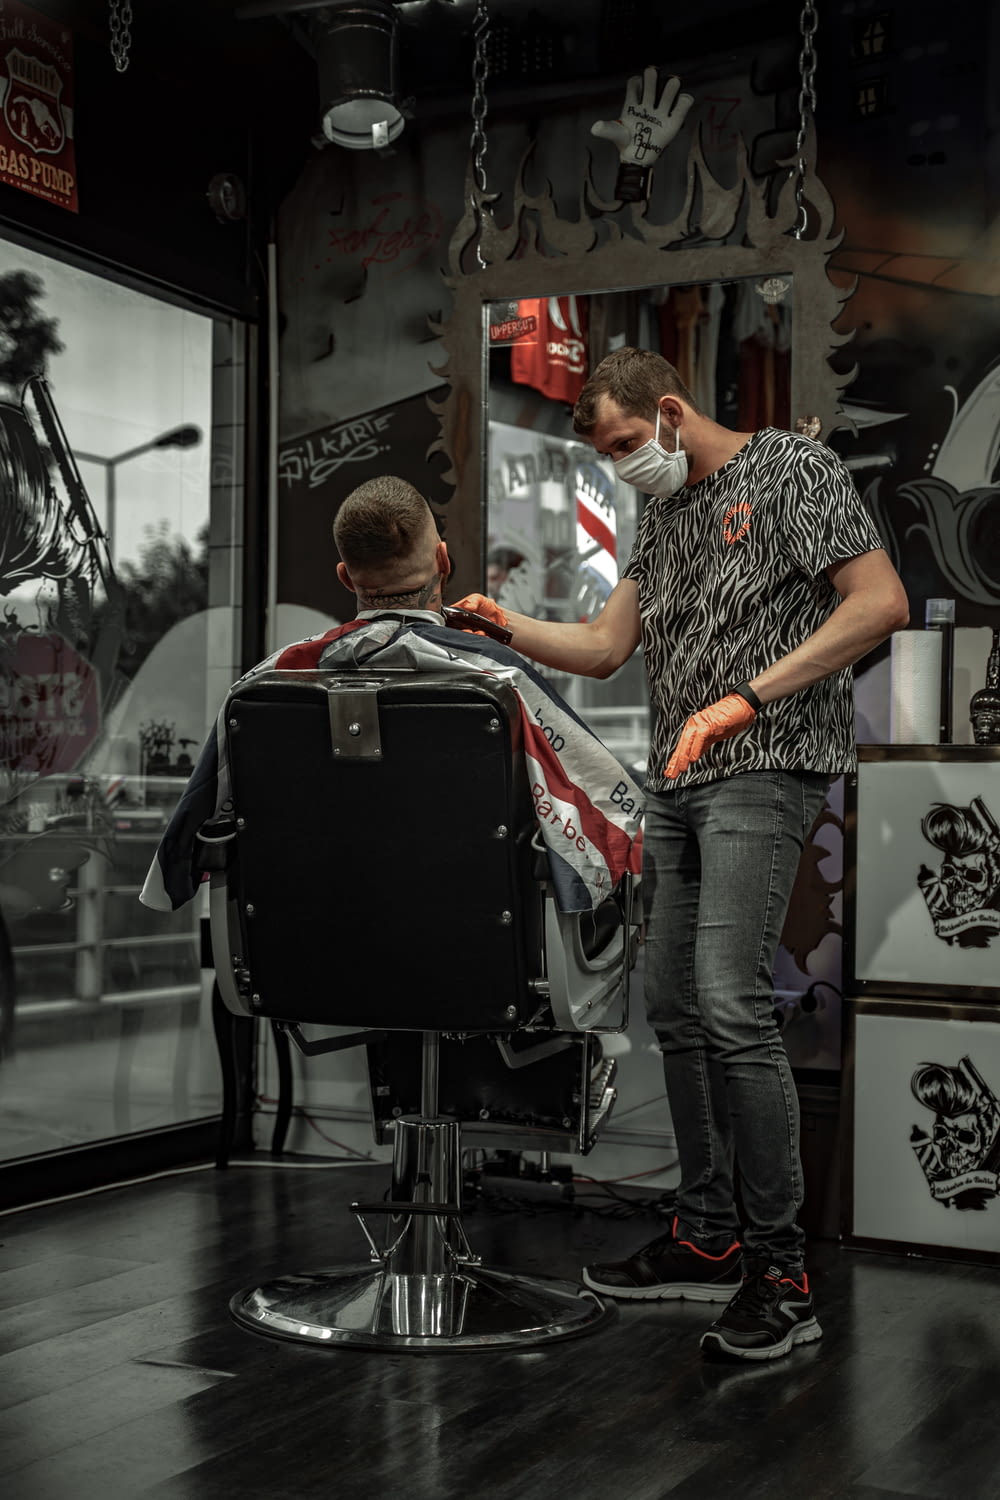 man in black and white shirt sitting on barber chair